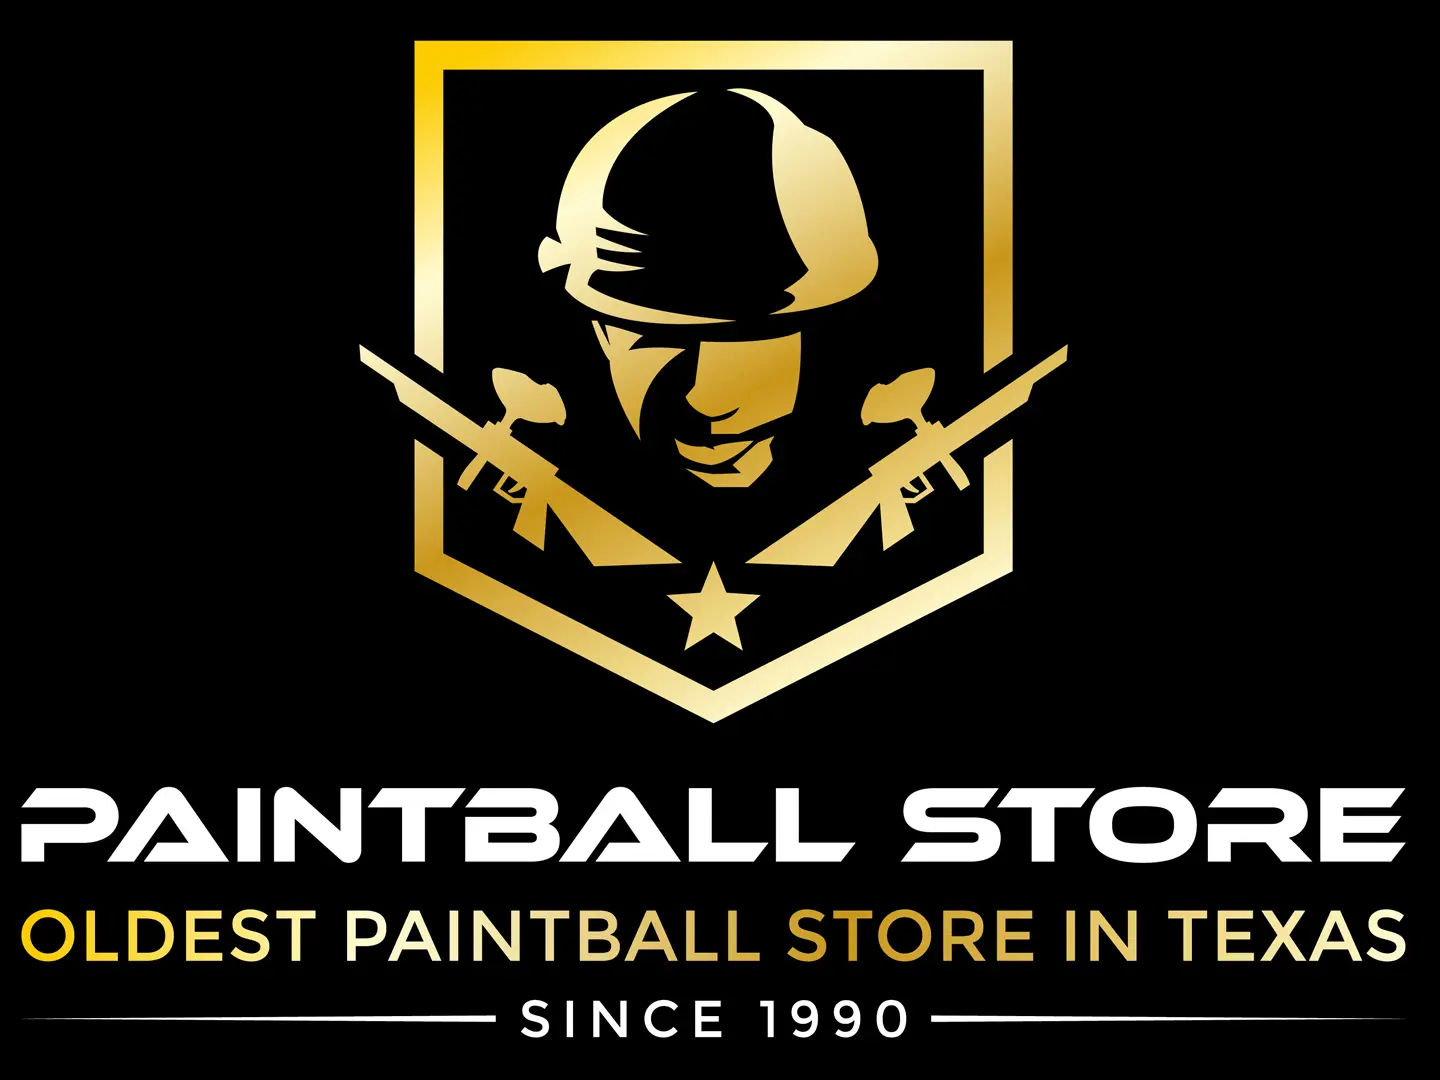 A logo for the paintball store.